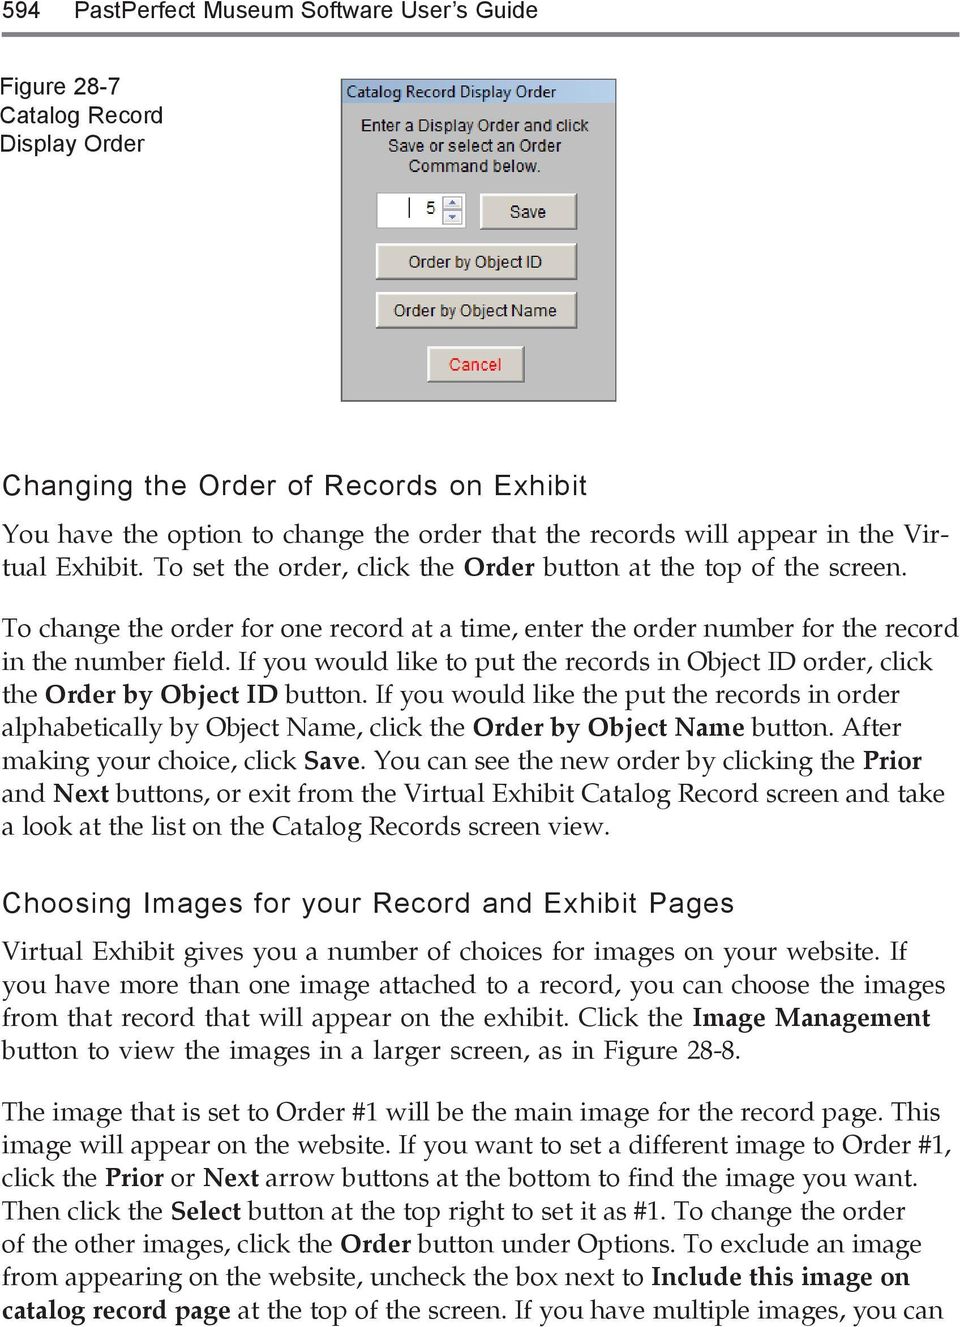 If you would like to put the records in Object ID order, click the Order by Object ID button.